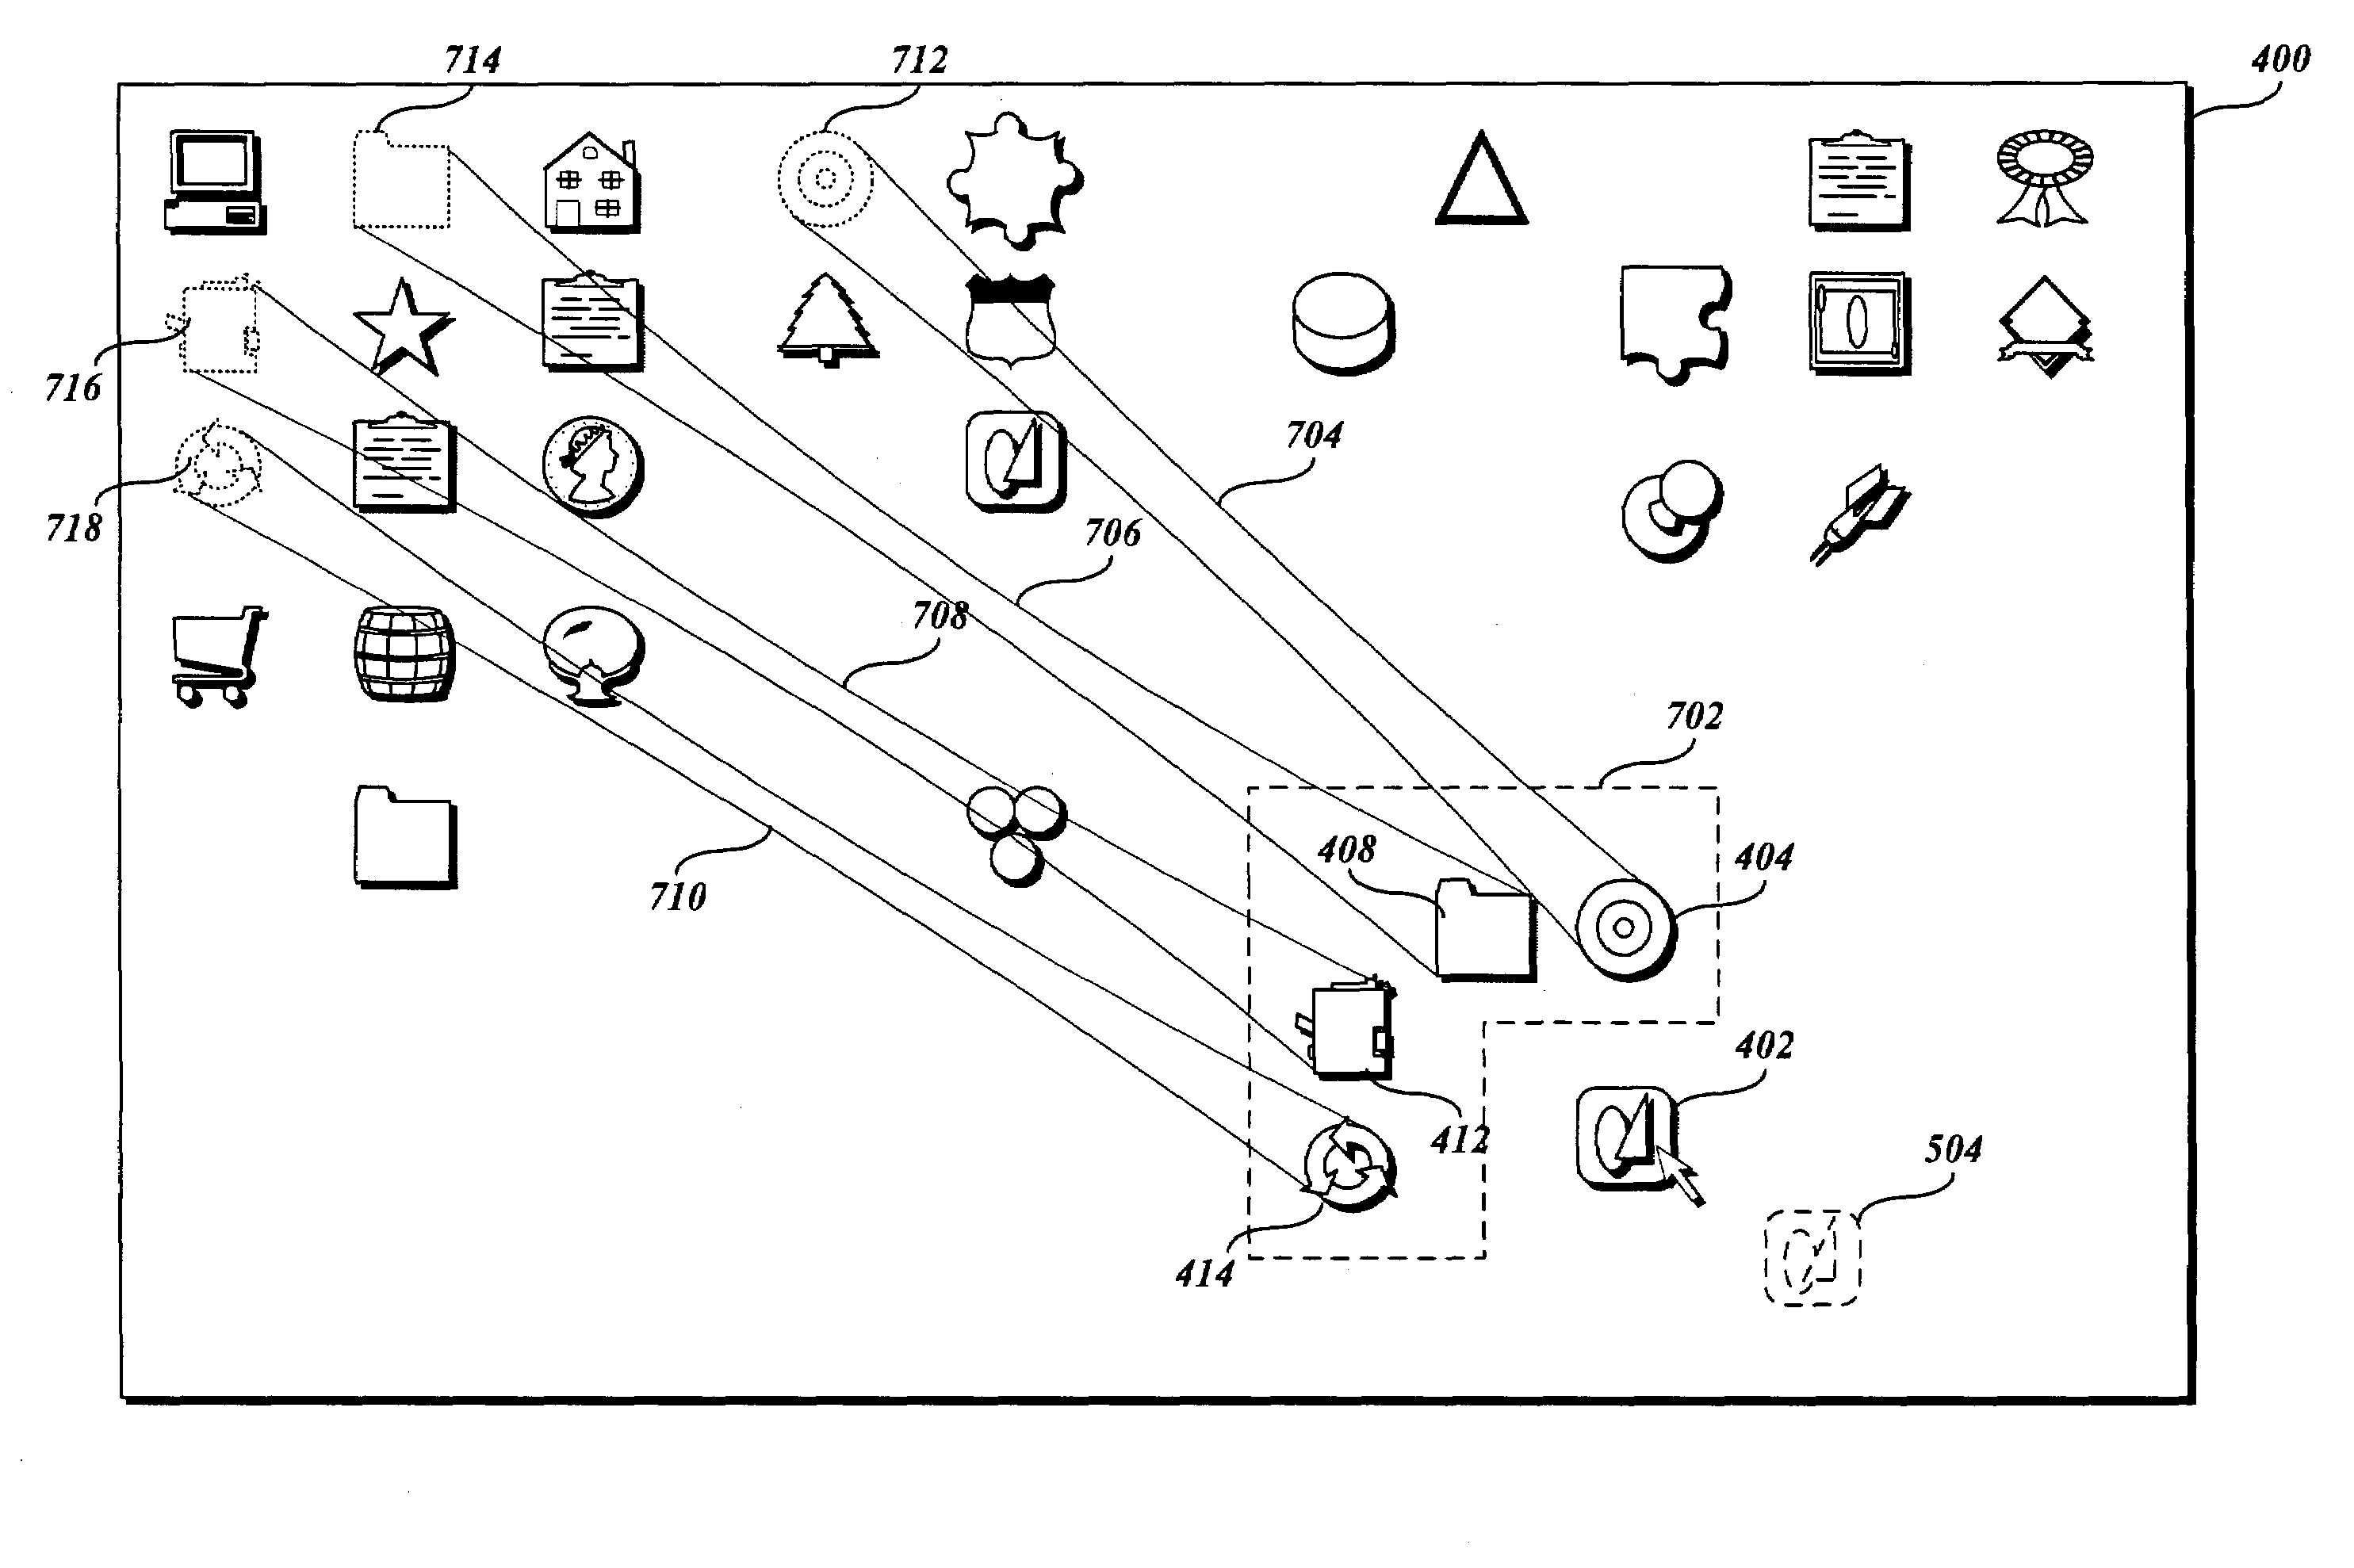 System and method for accessing remote screen content